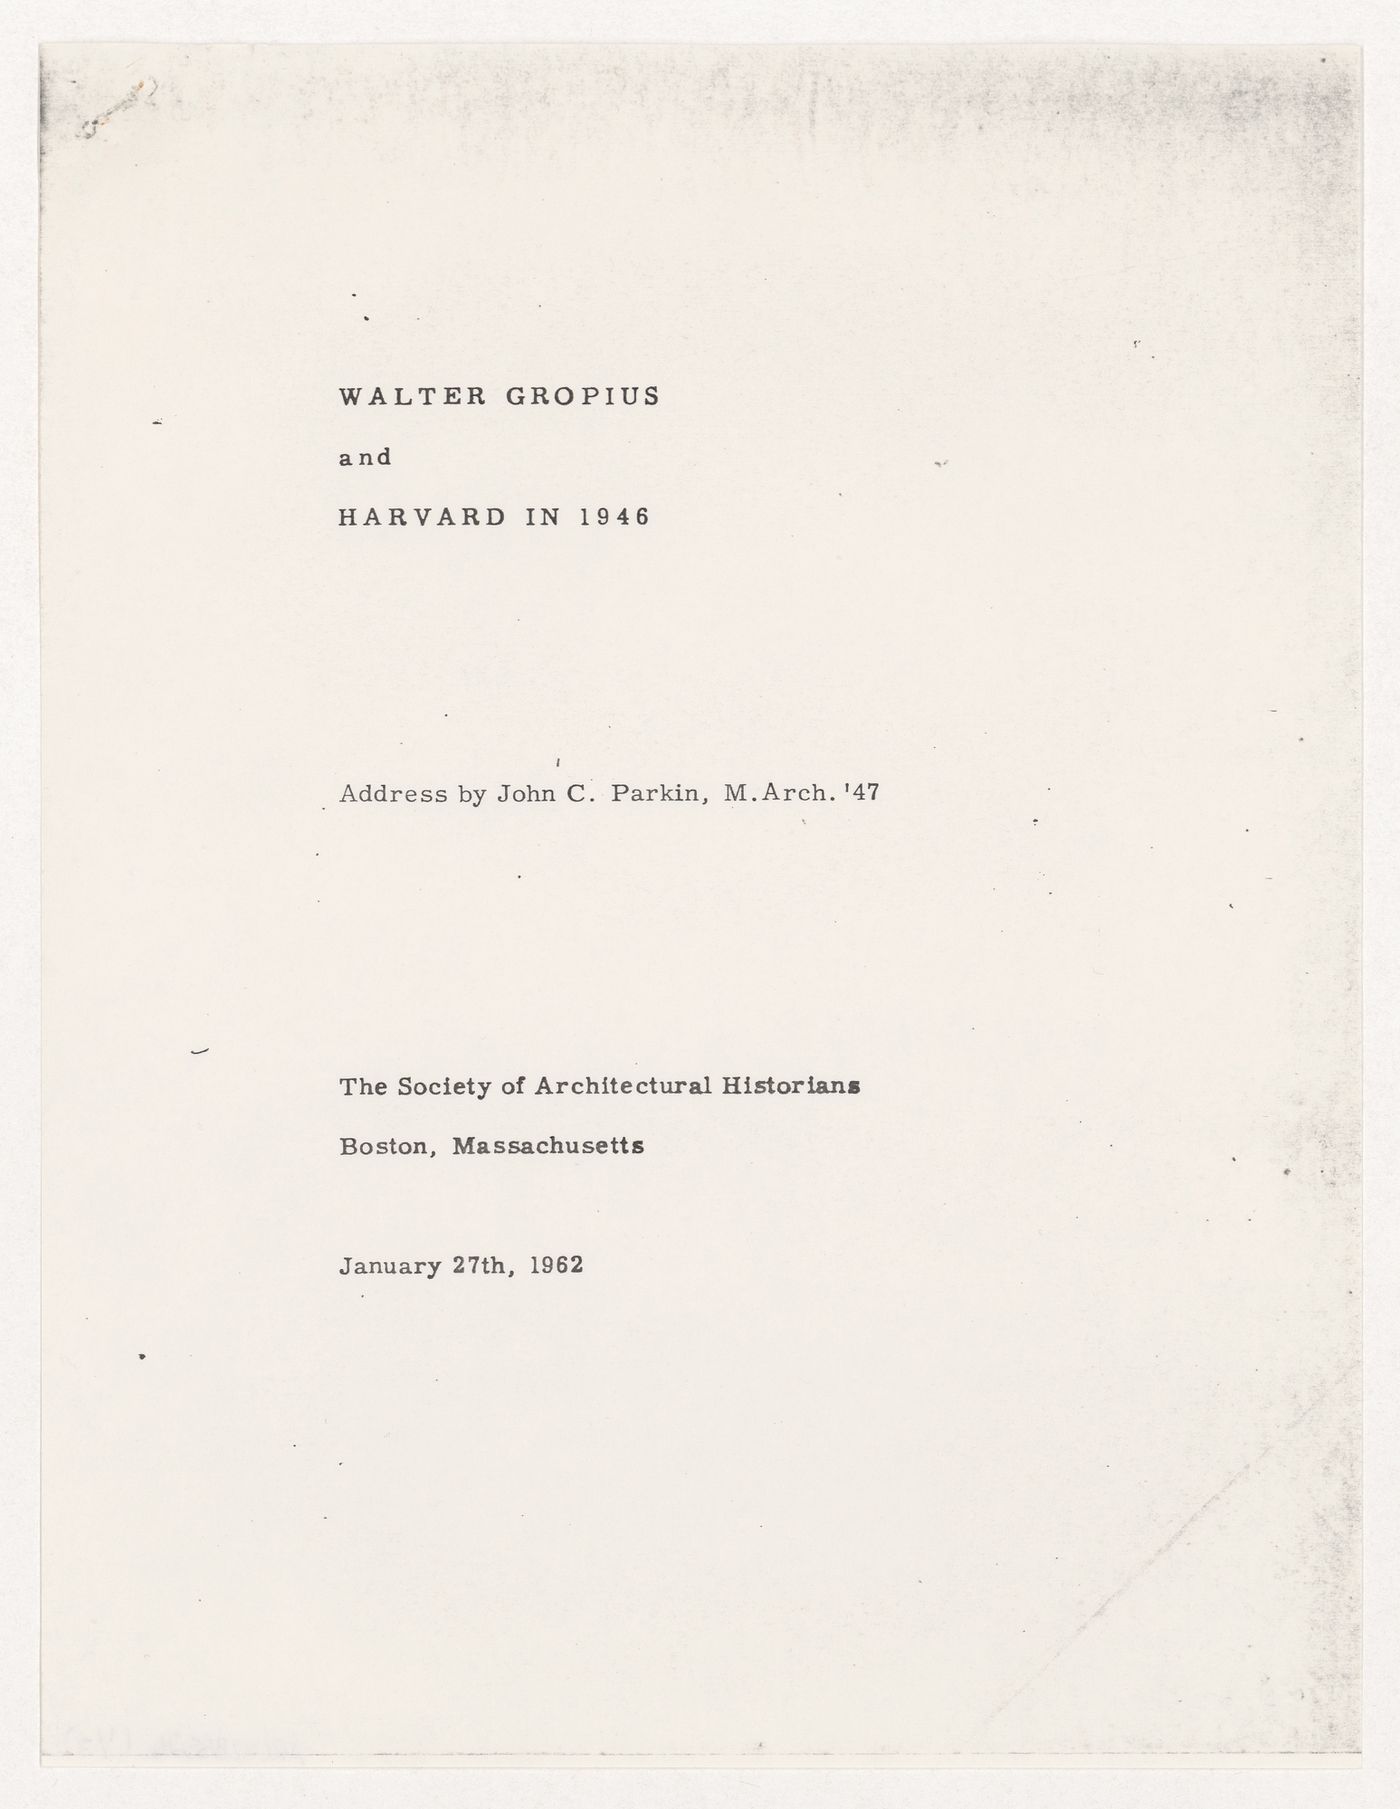 "Walter Gropius and Harvard in 1946" address by Parkin given to The Society of Architectural Historians in Boston, Massachusetts